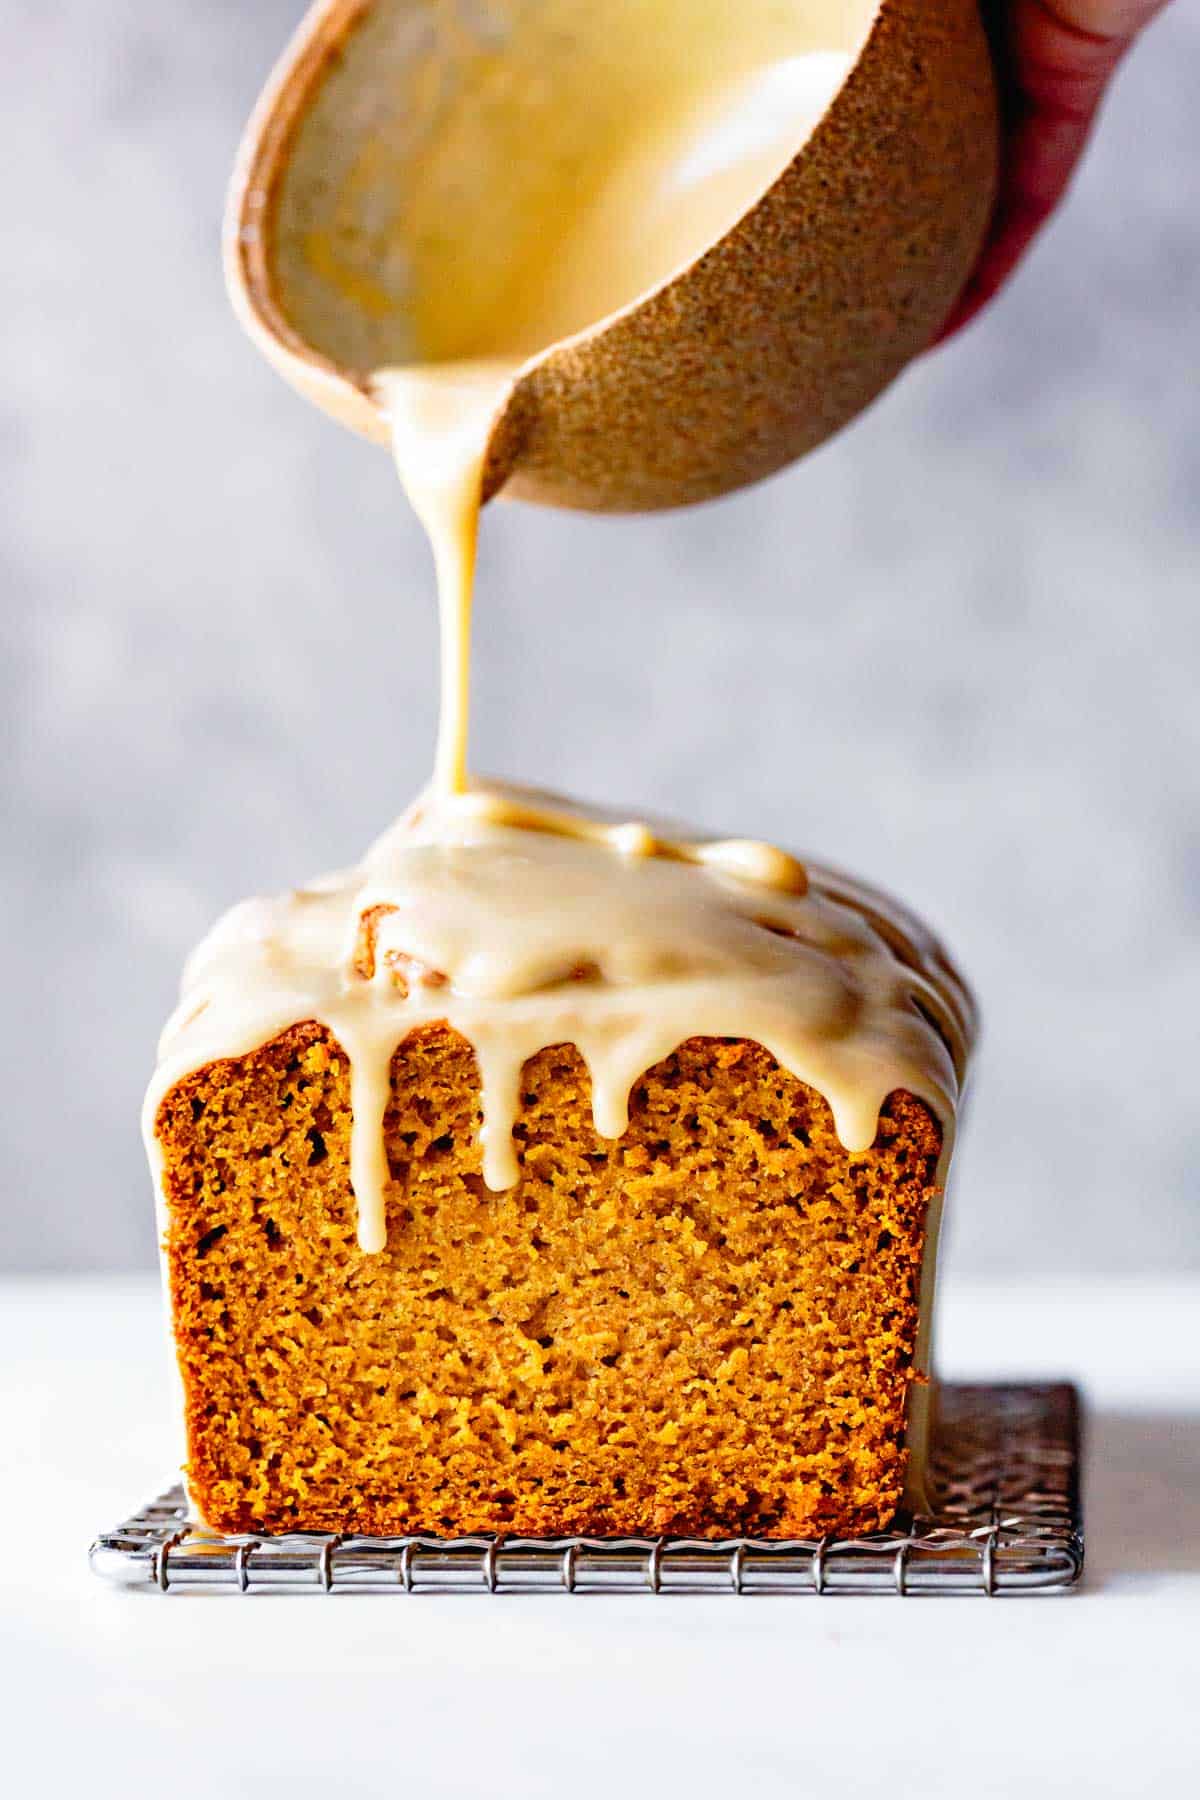 maple glaze is being drizzled over a loaf of pumpkin bread